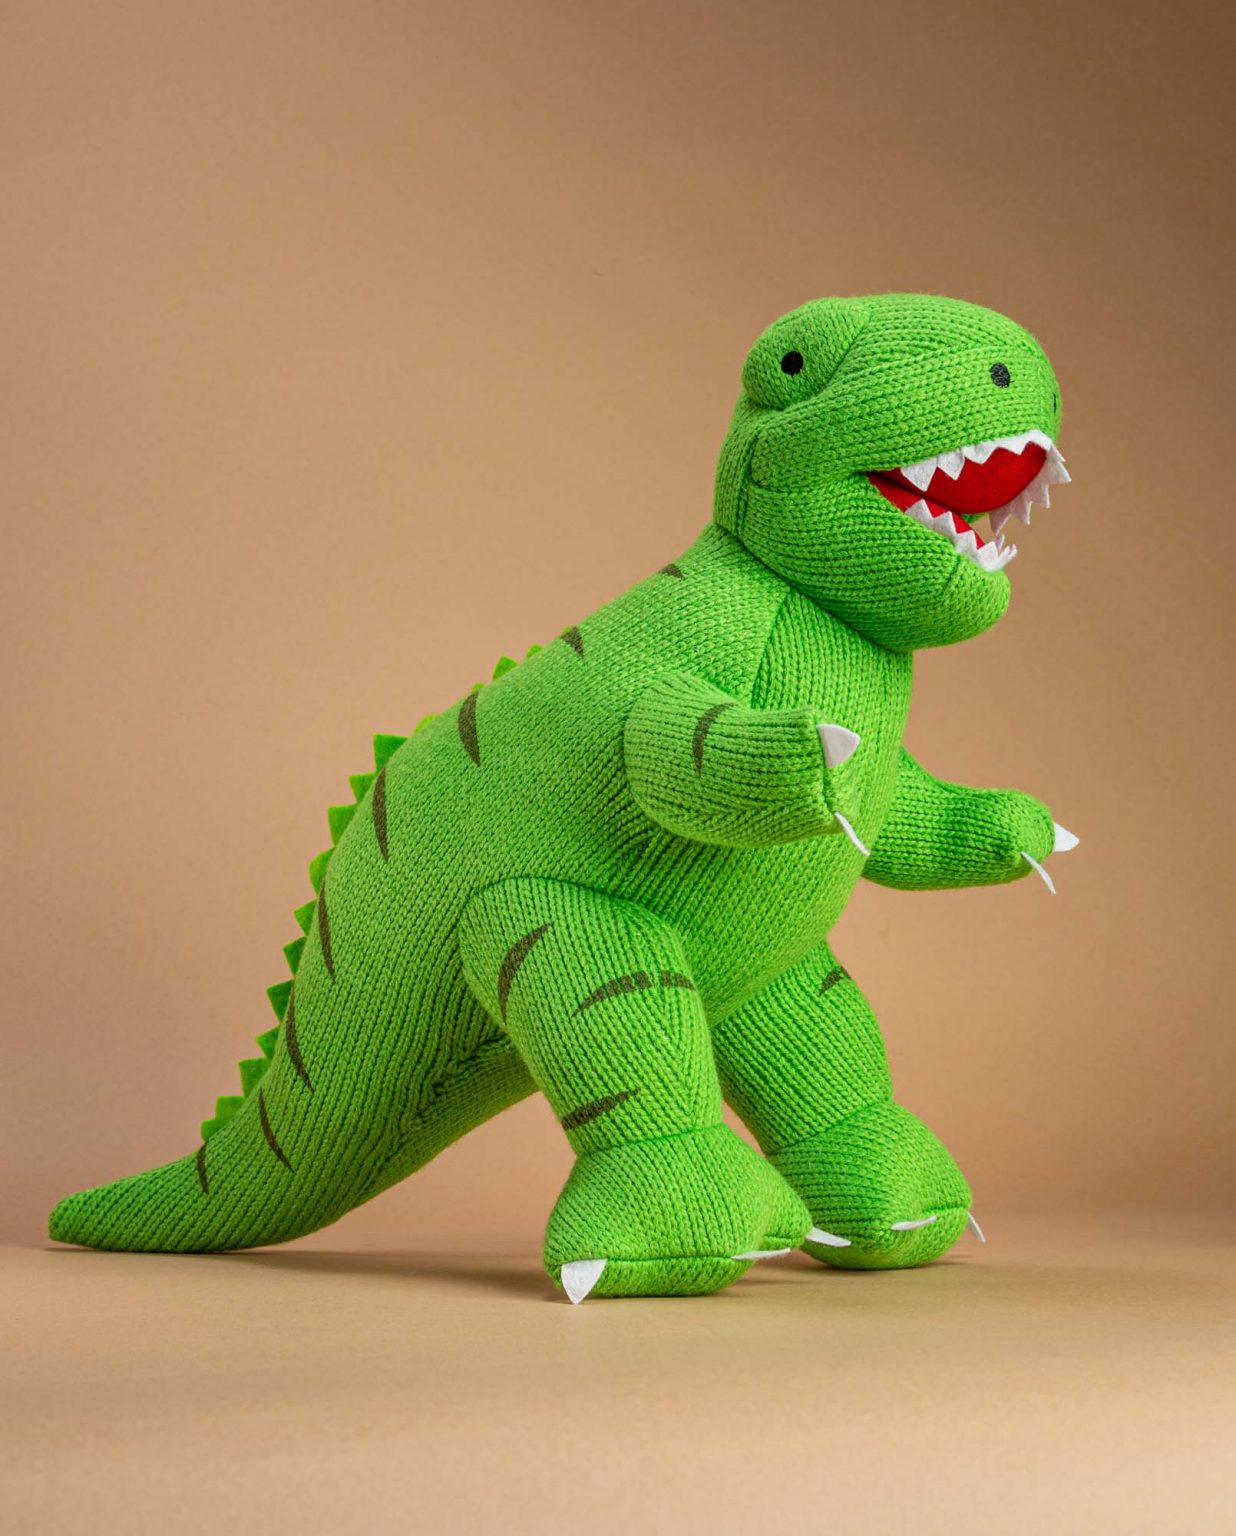 Large Knitted T.rex toy